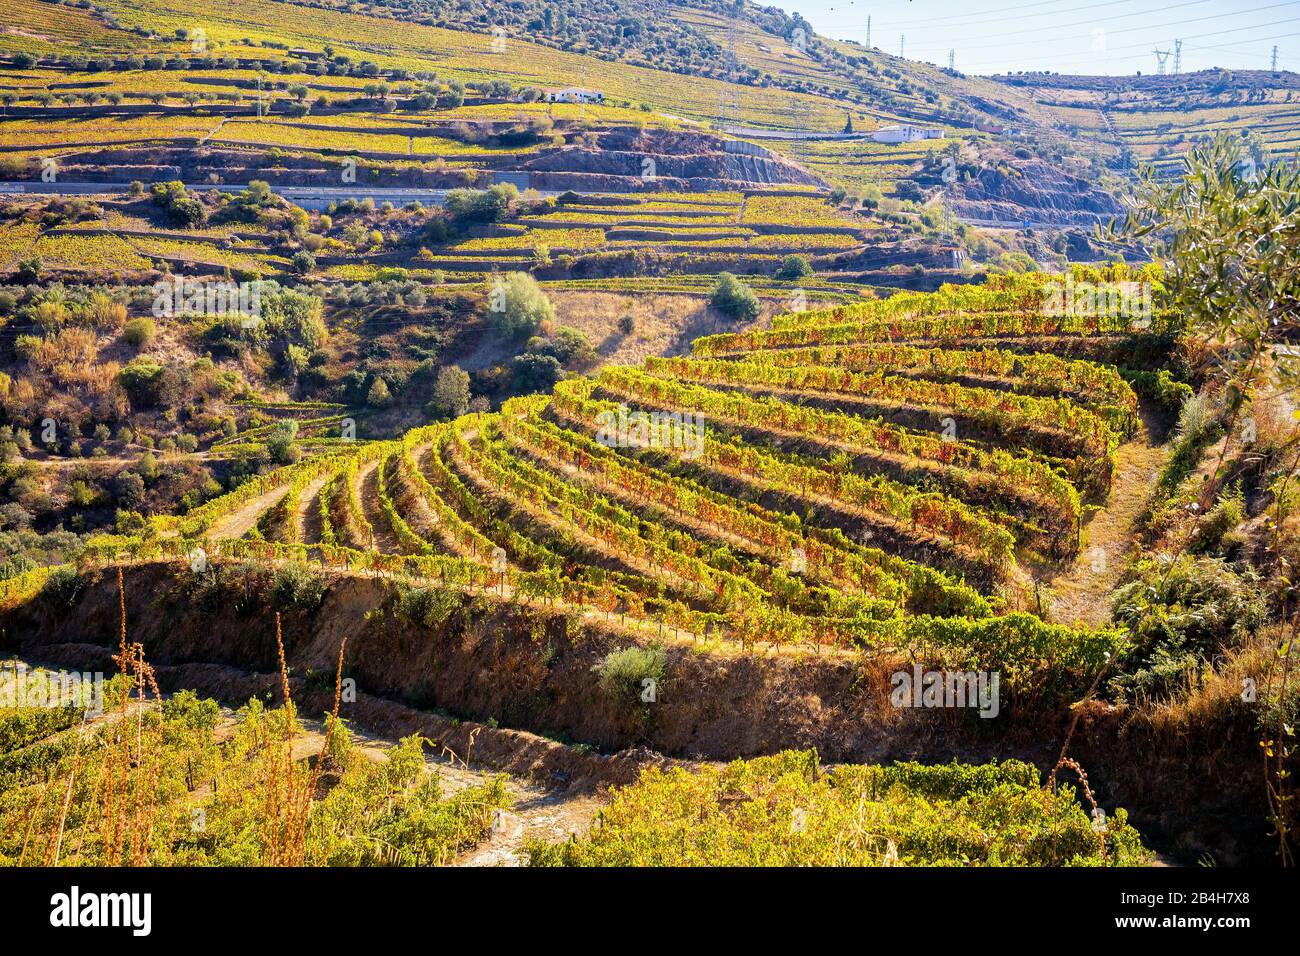 Viniculture in the Douro Valley, Portugal Stock Photo